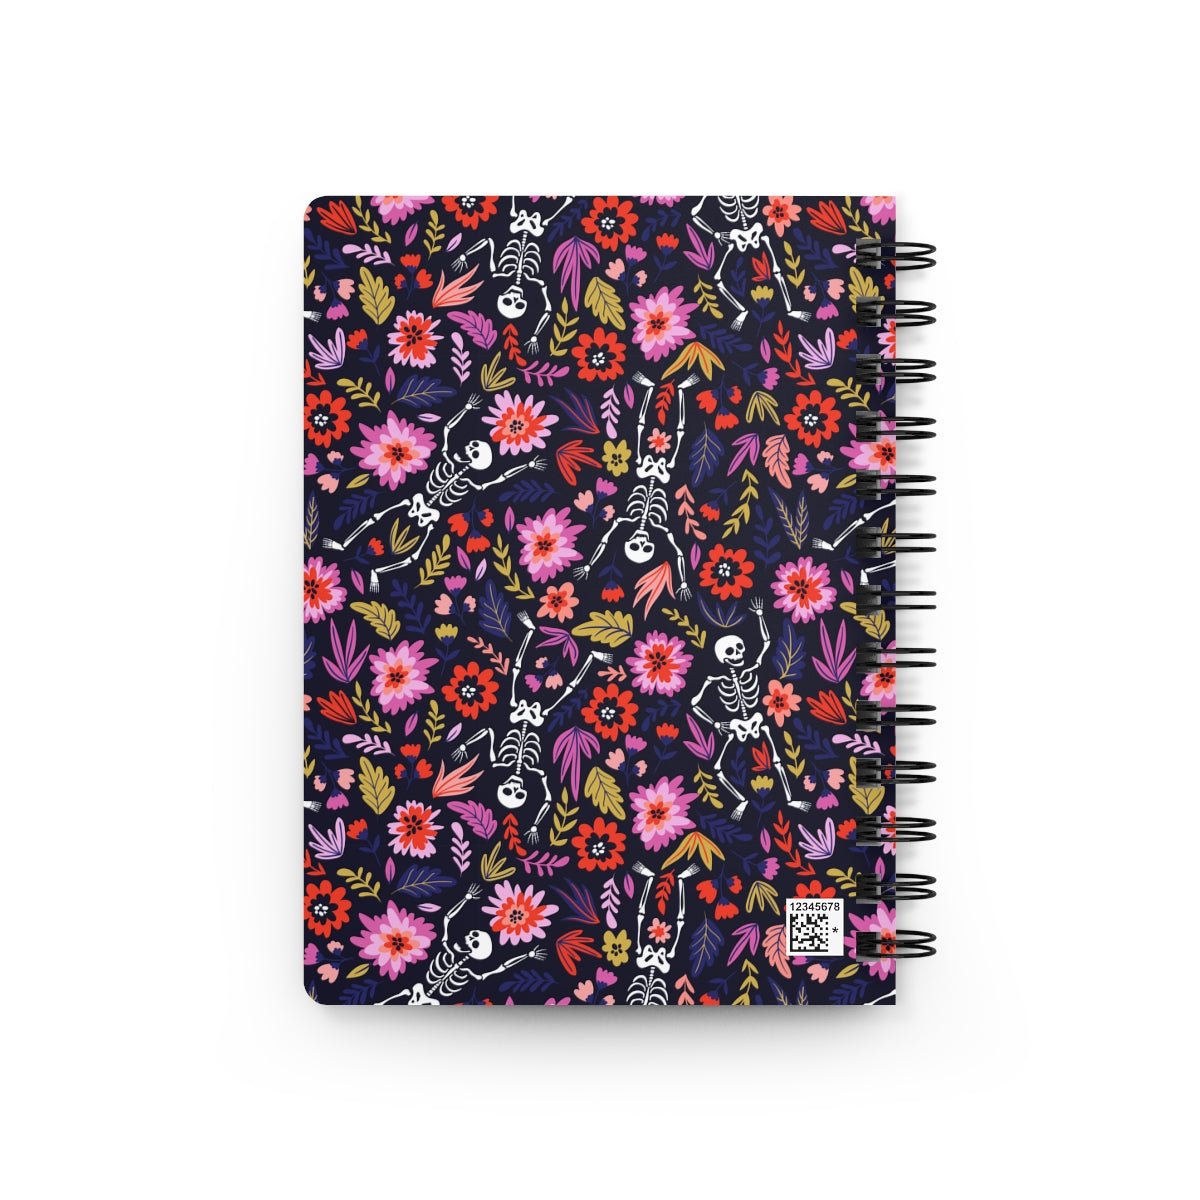 Dancing Skeletons Spiral Bound Journal - Puffin Lime